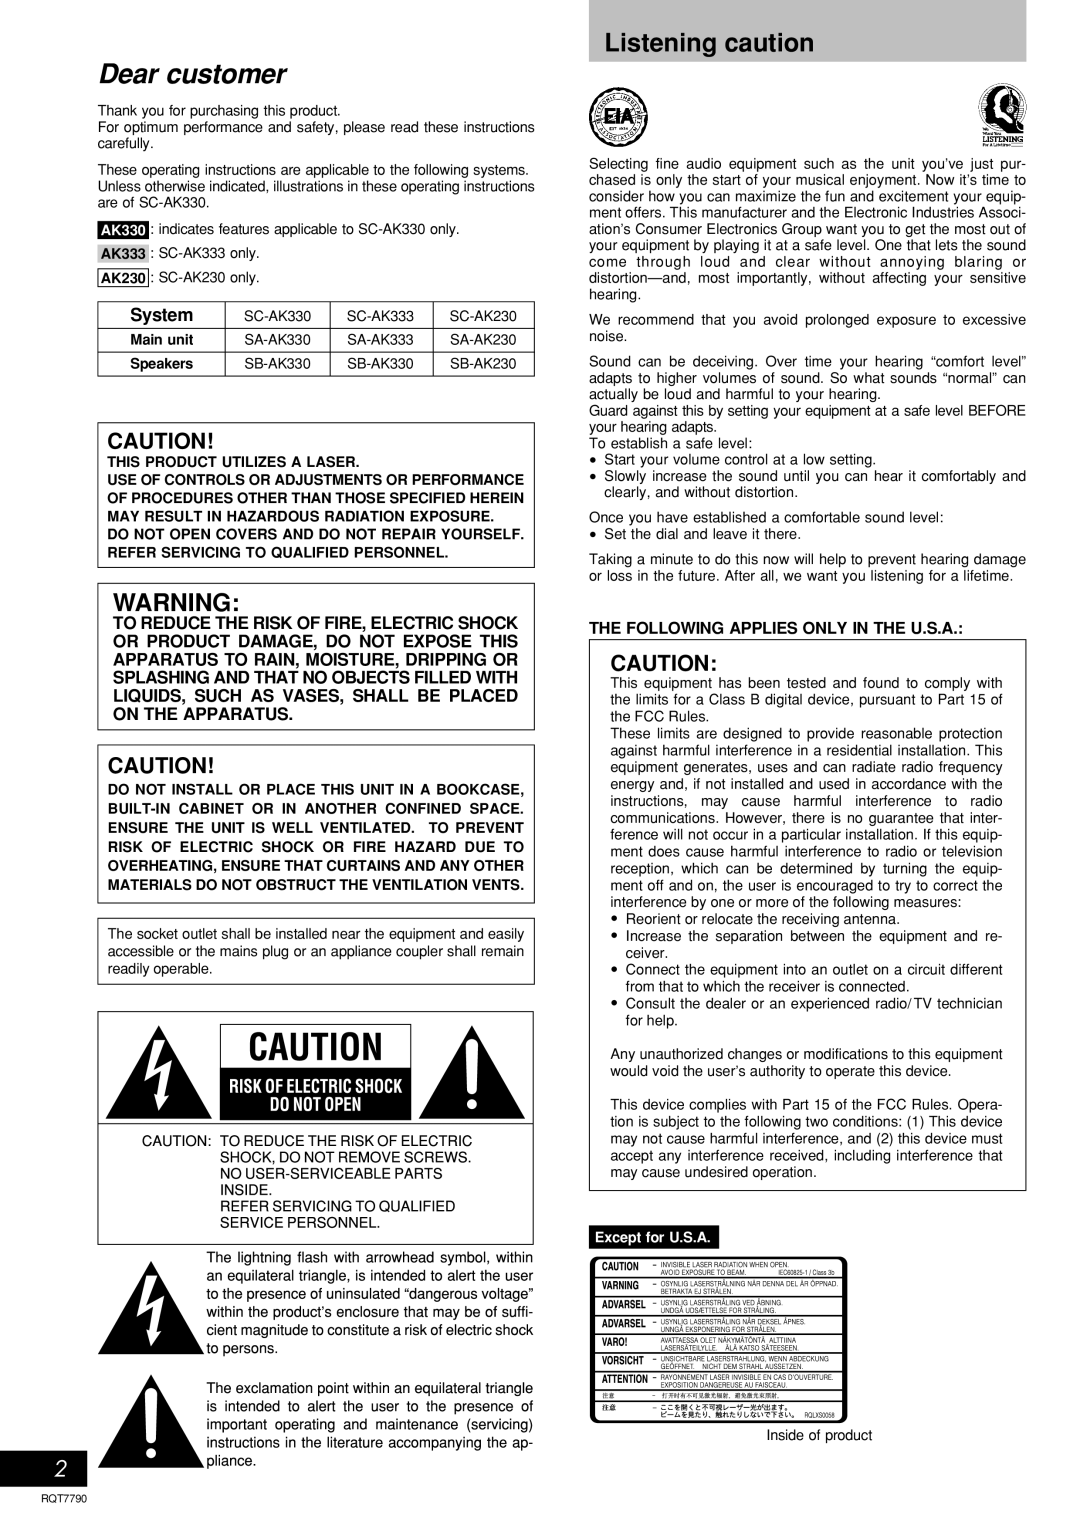 Panasonic SC-AK230, SC-AK333 operating instructions Listening caution, System, Except for U.S.A 